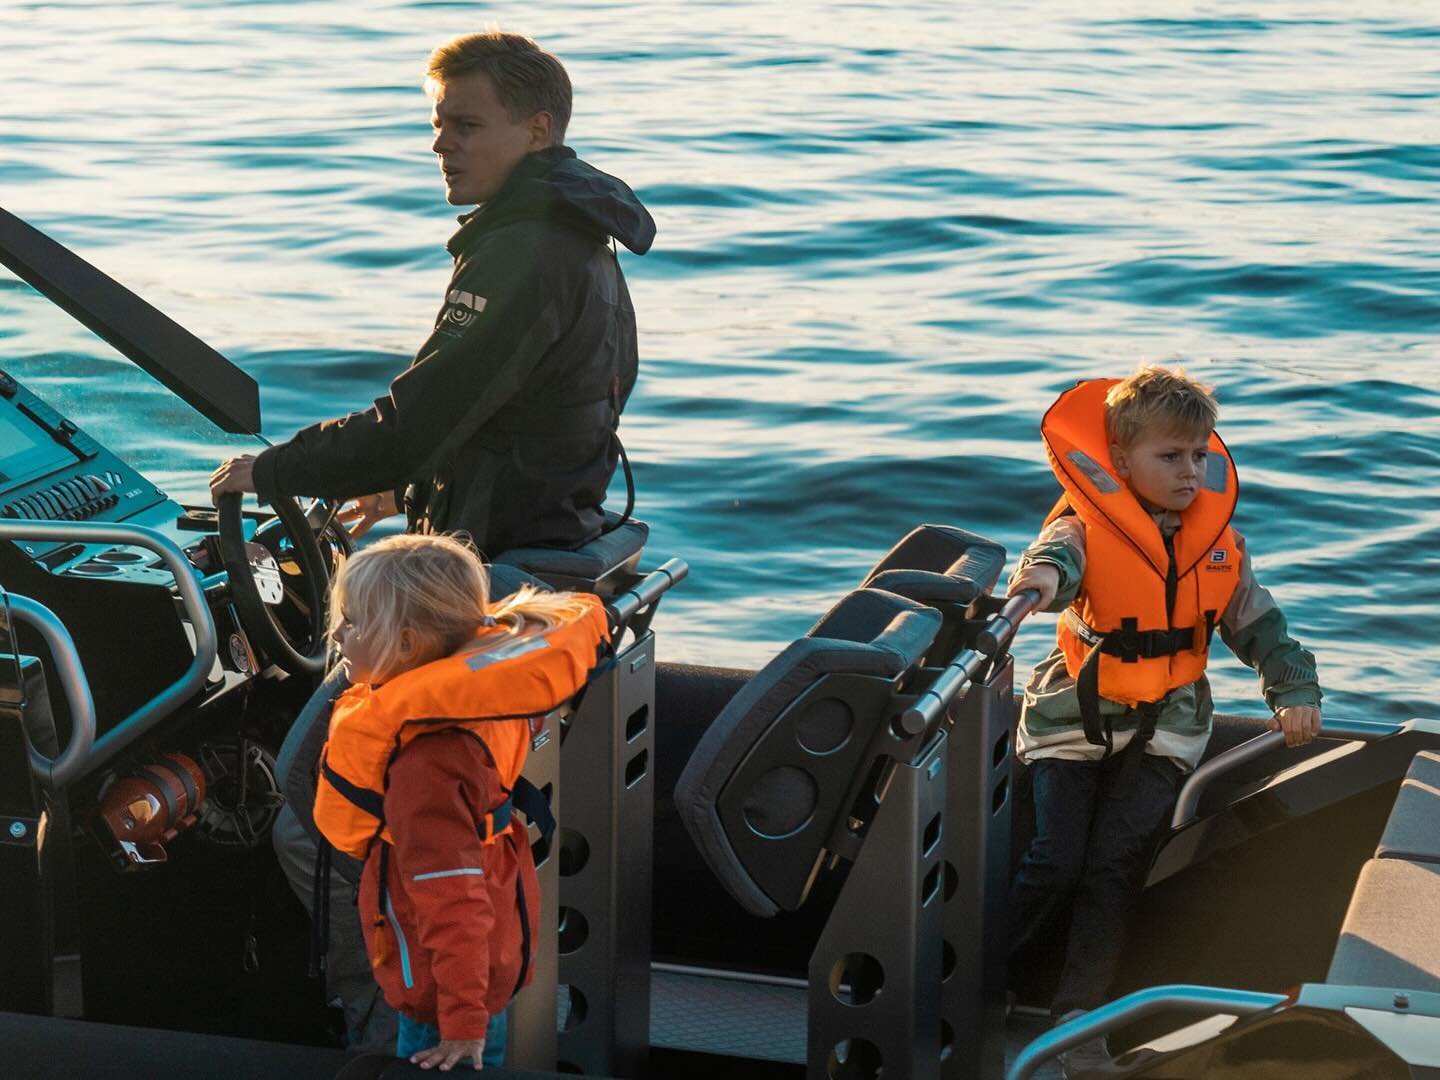 Take your family out on an adventurous trip with the 30 Sport. It&rsquo;s perfect for a day out on the water. Whether you&rsquo;re exploring new coastlines or just enjoying the sea breeze, our boat provides a smooth, enjoyable ride for everyone. 

#G